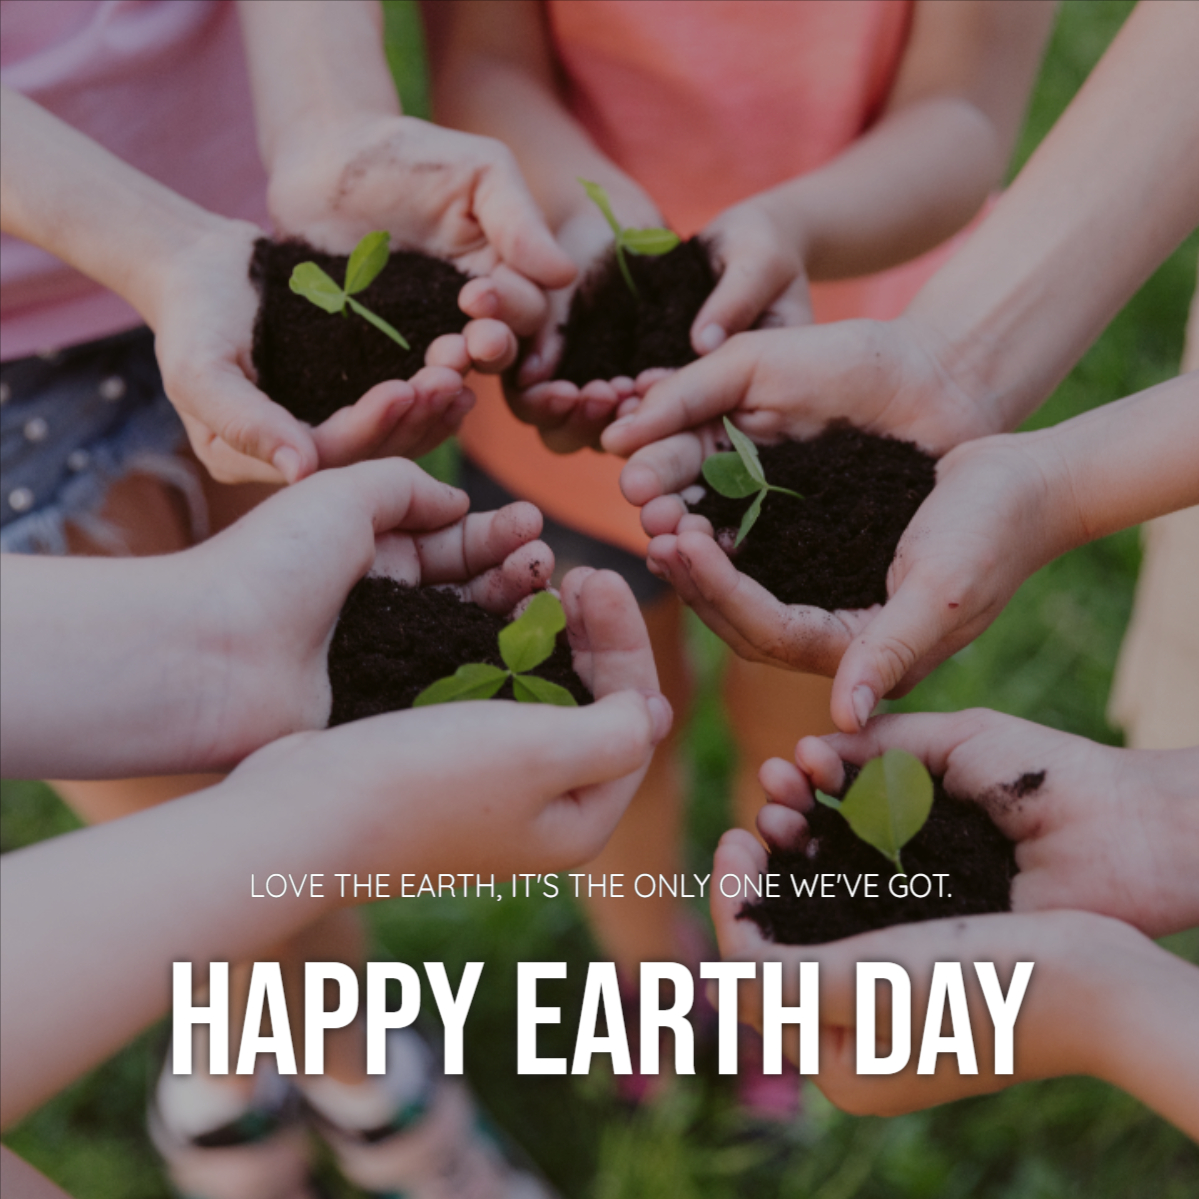 Happy Earth Day poster download for free